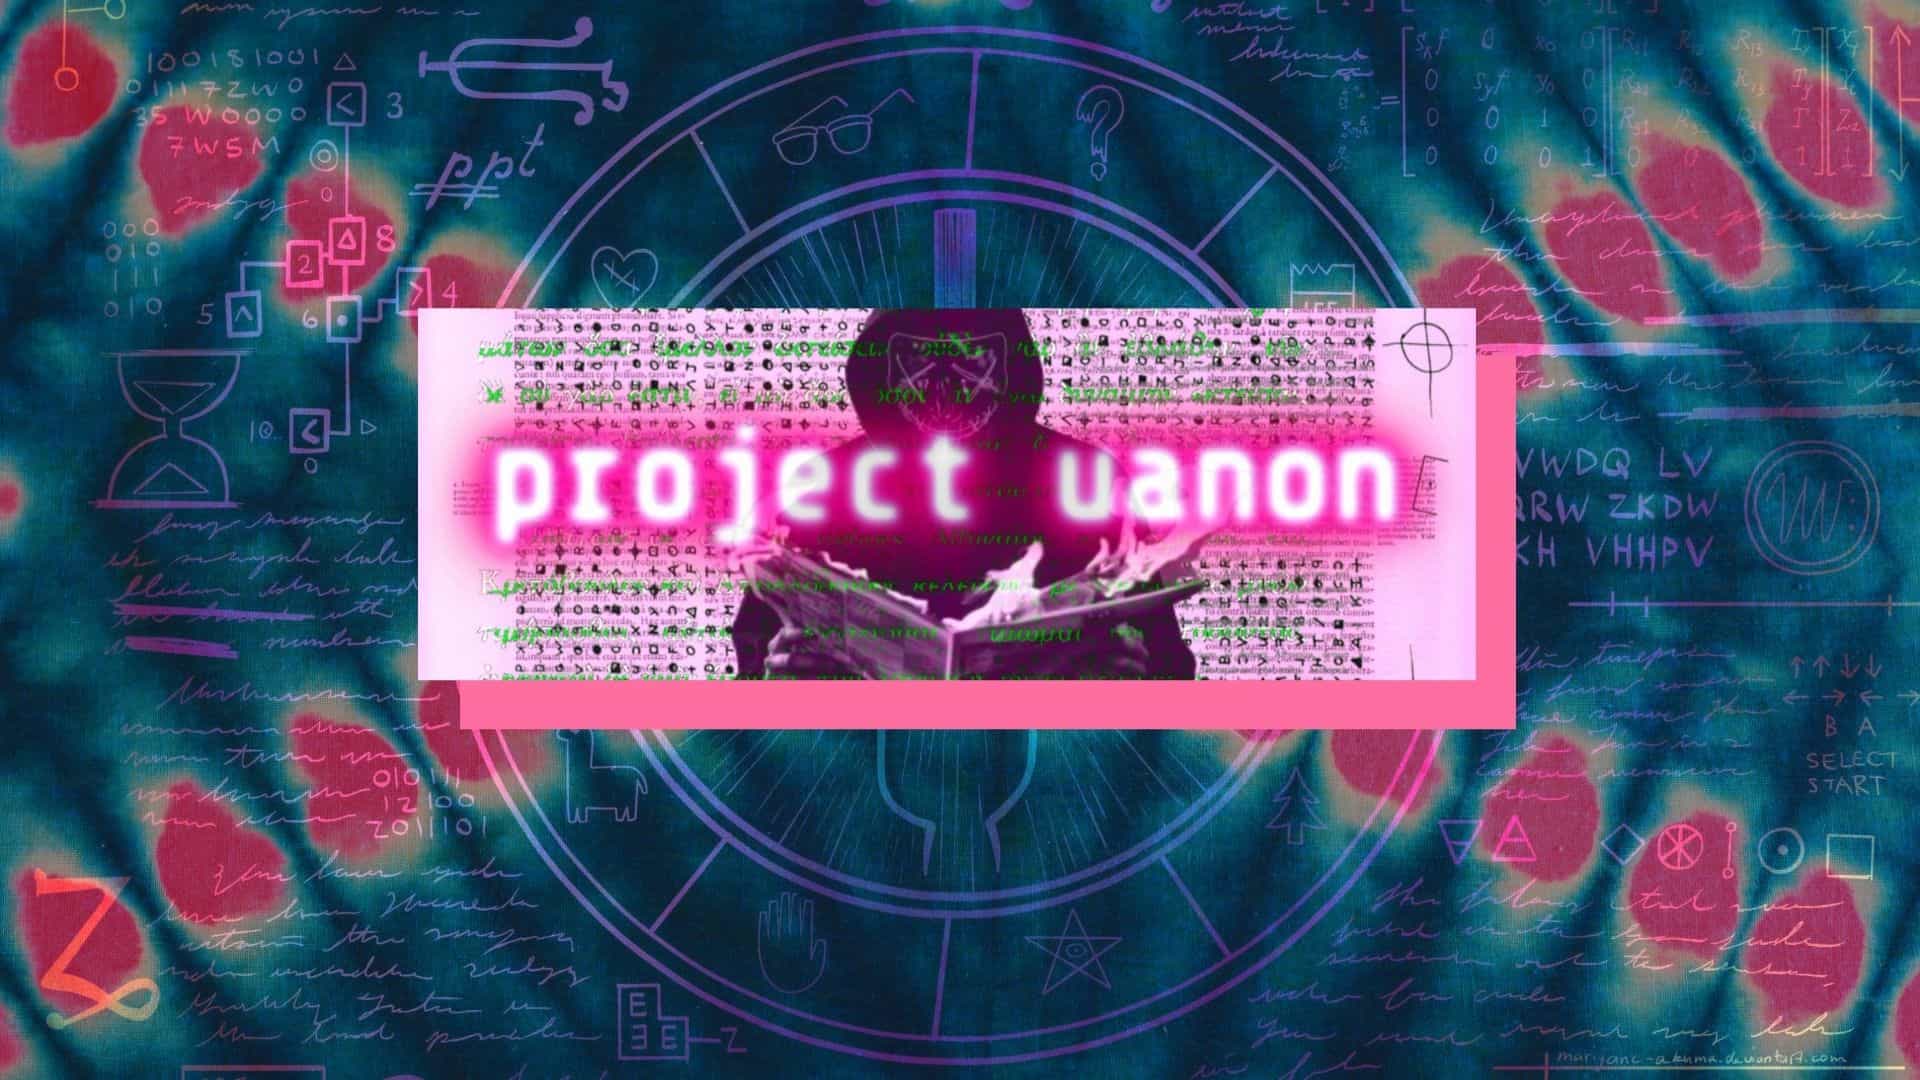 Project Uanon